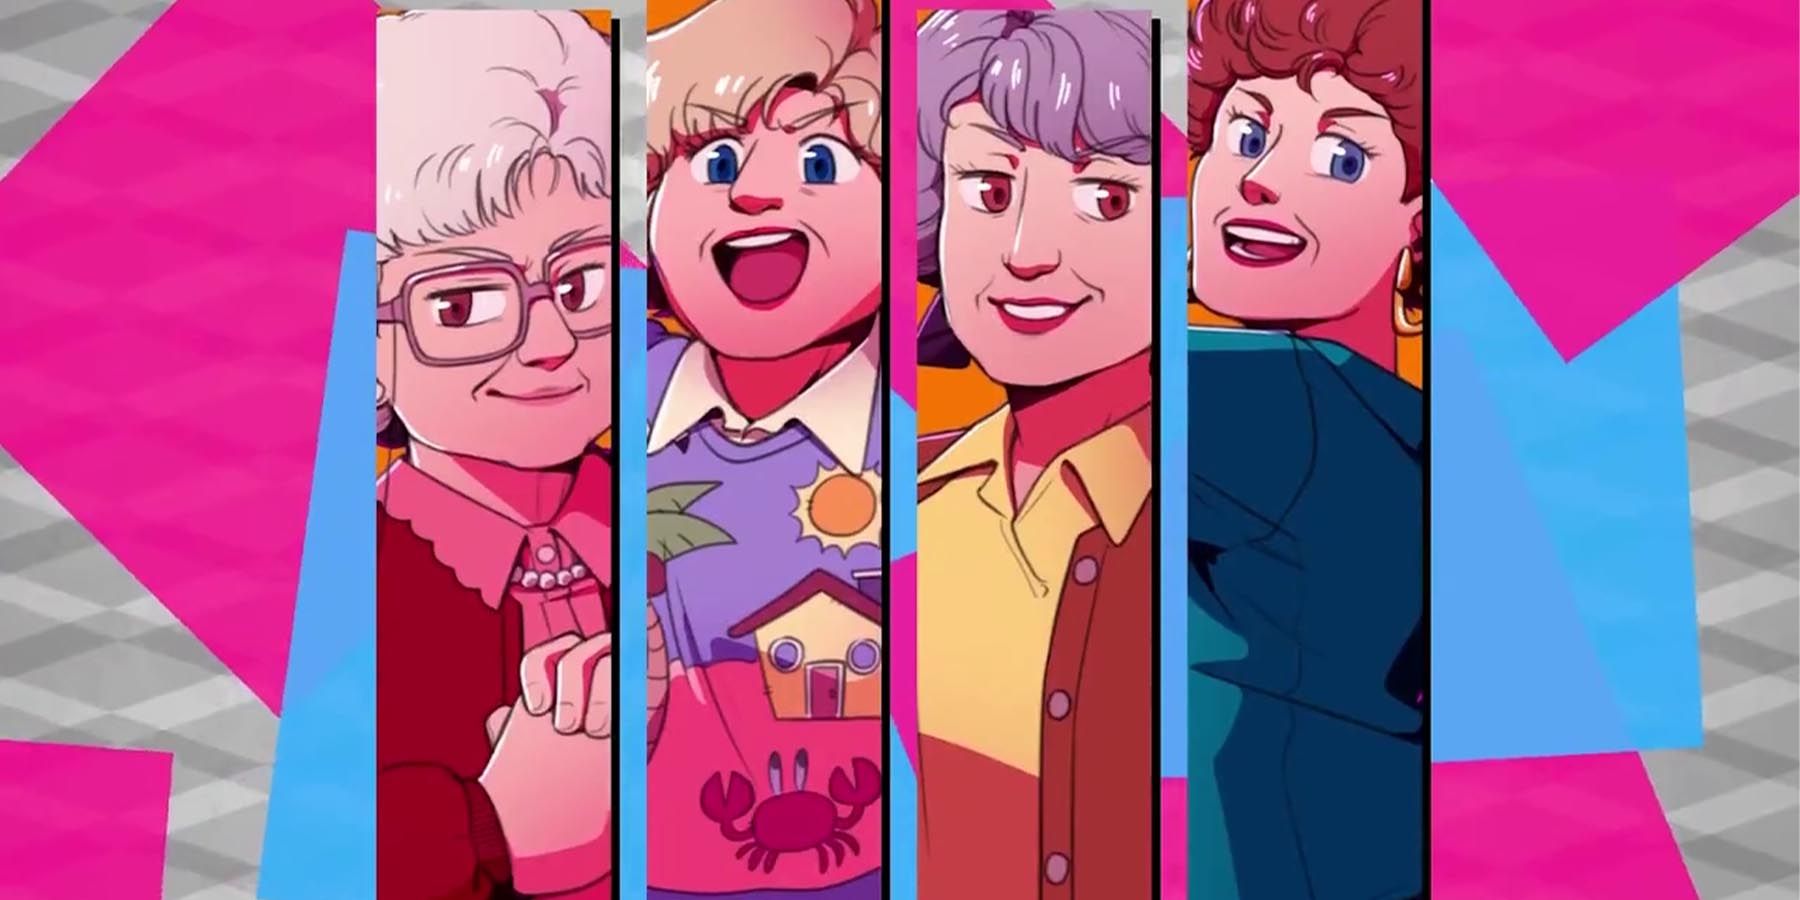 The Golden Girls Persona Fangame